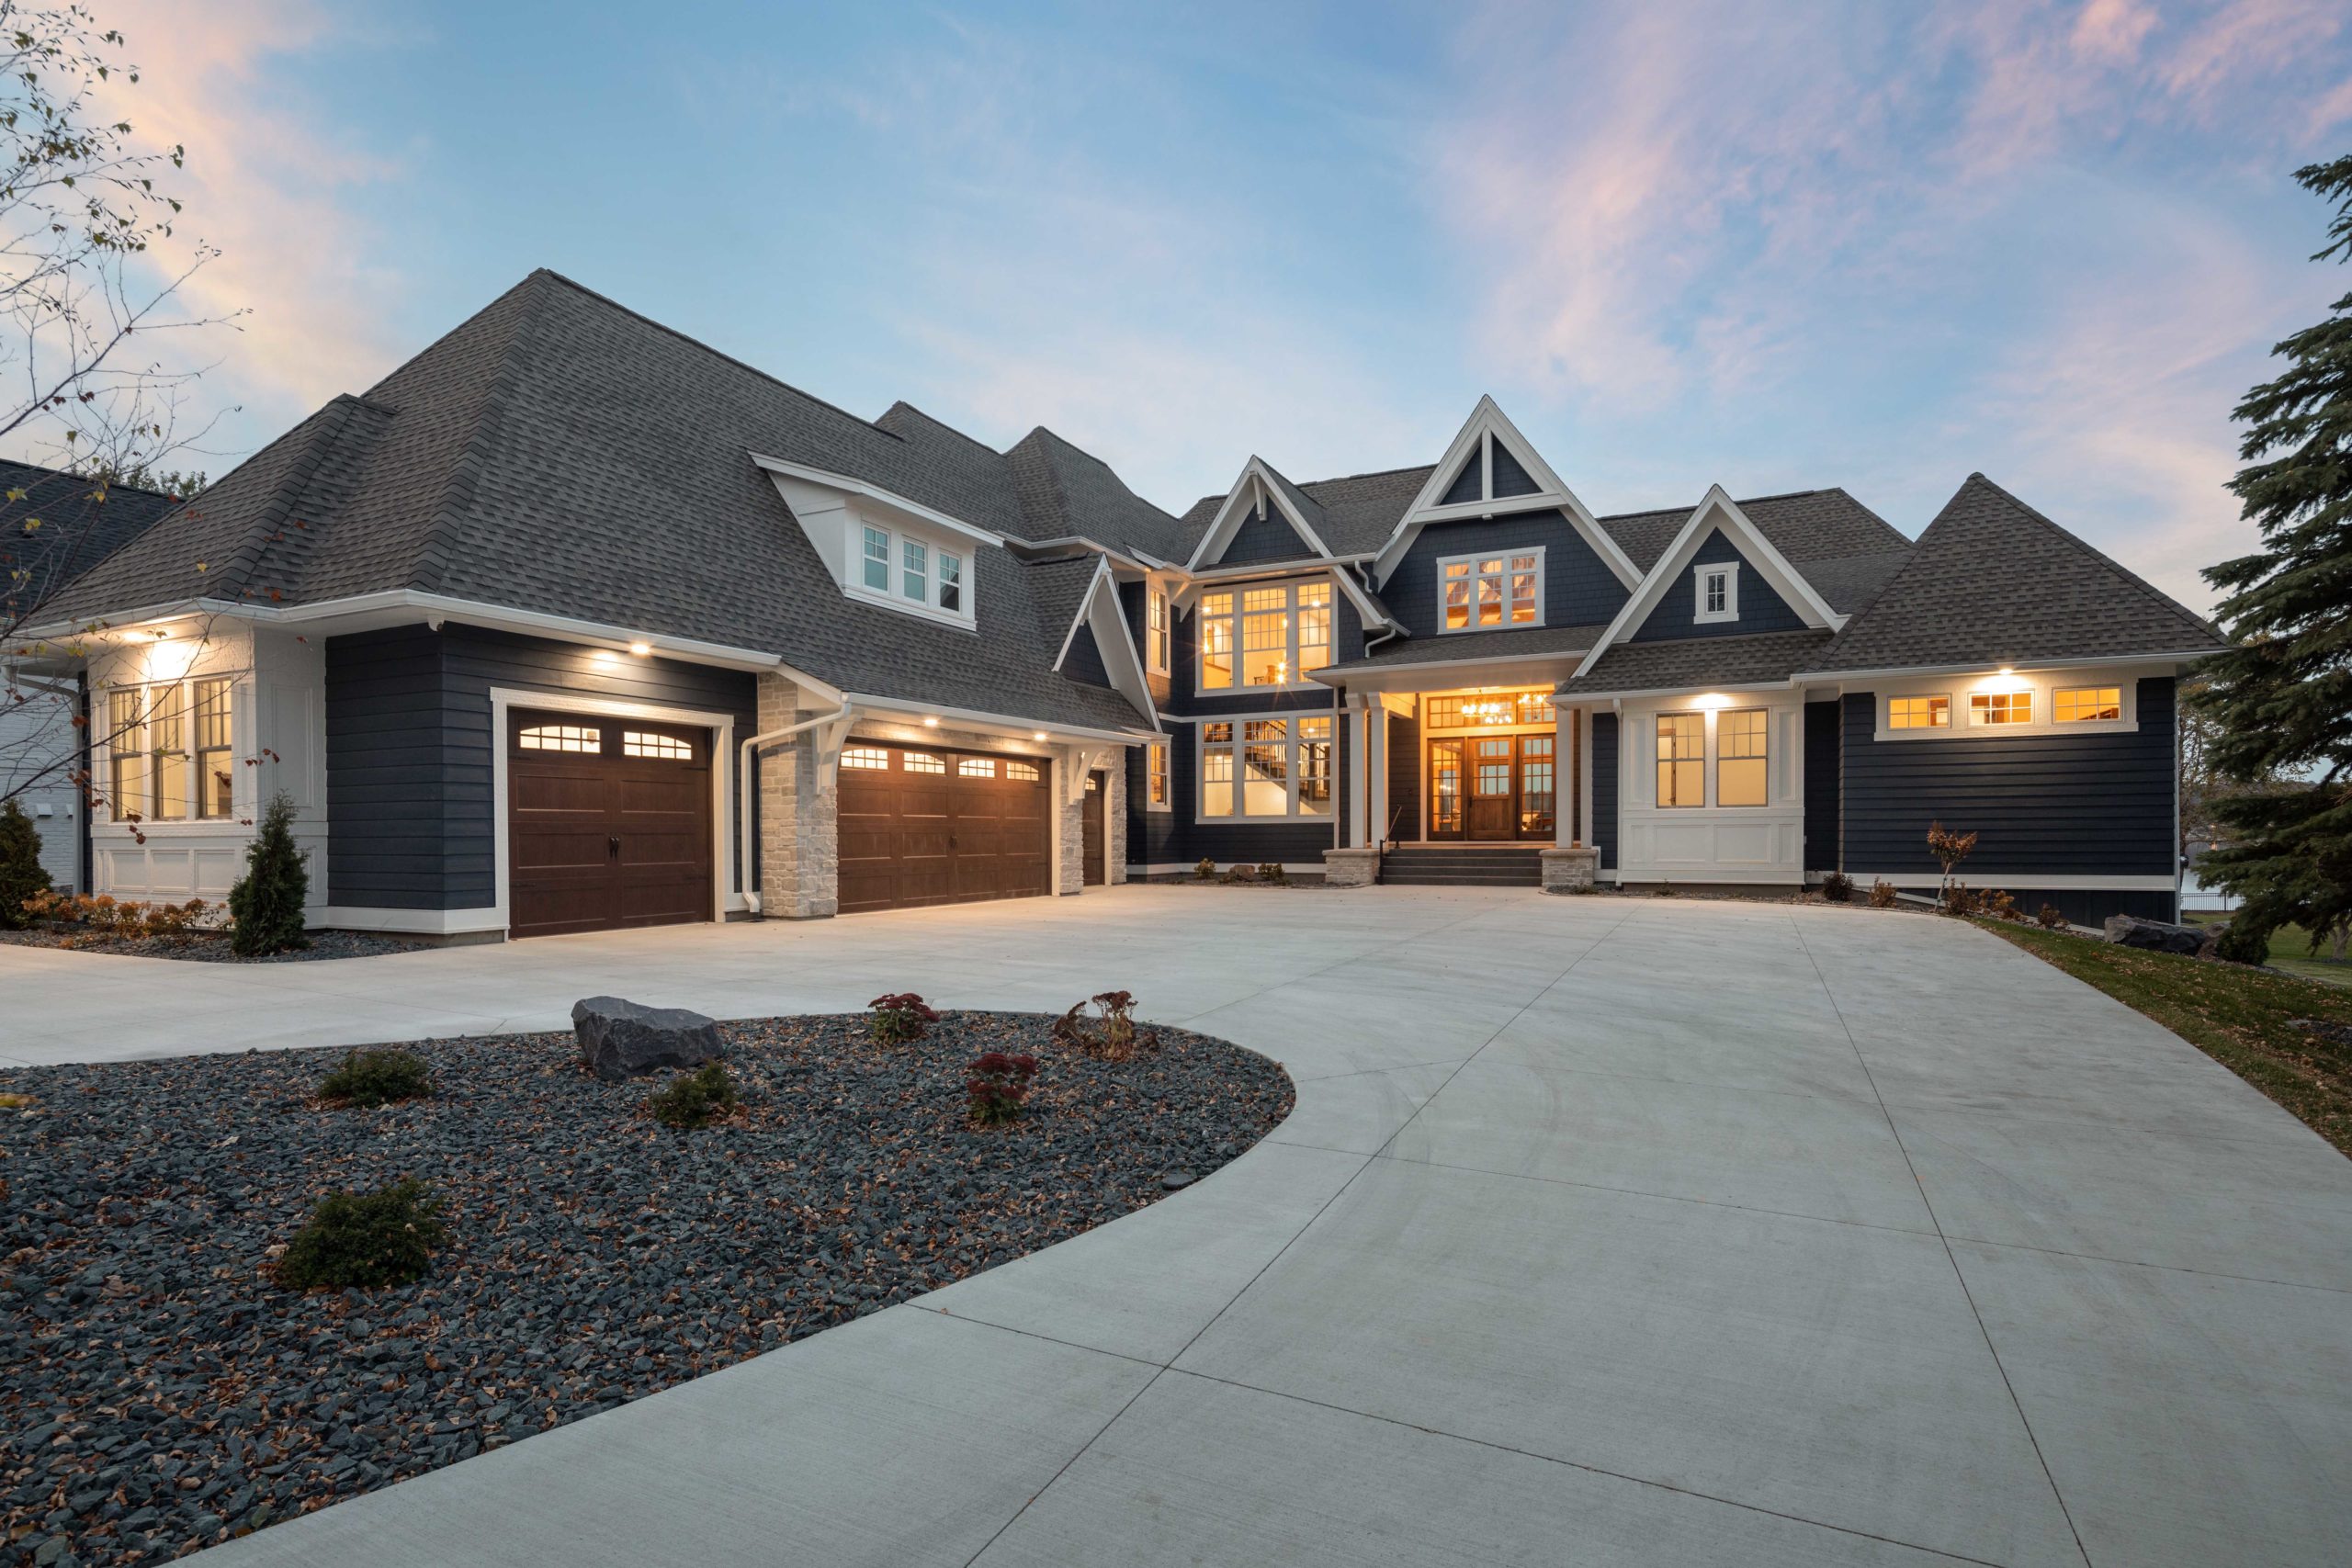 Explore home exterior design ideas for a large home with a driveway and garage.